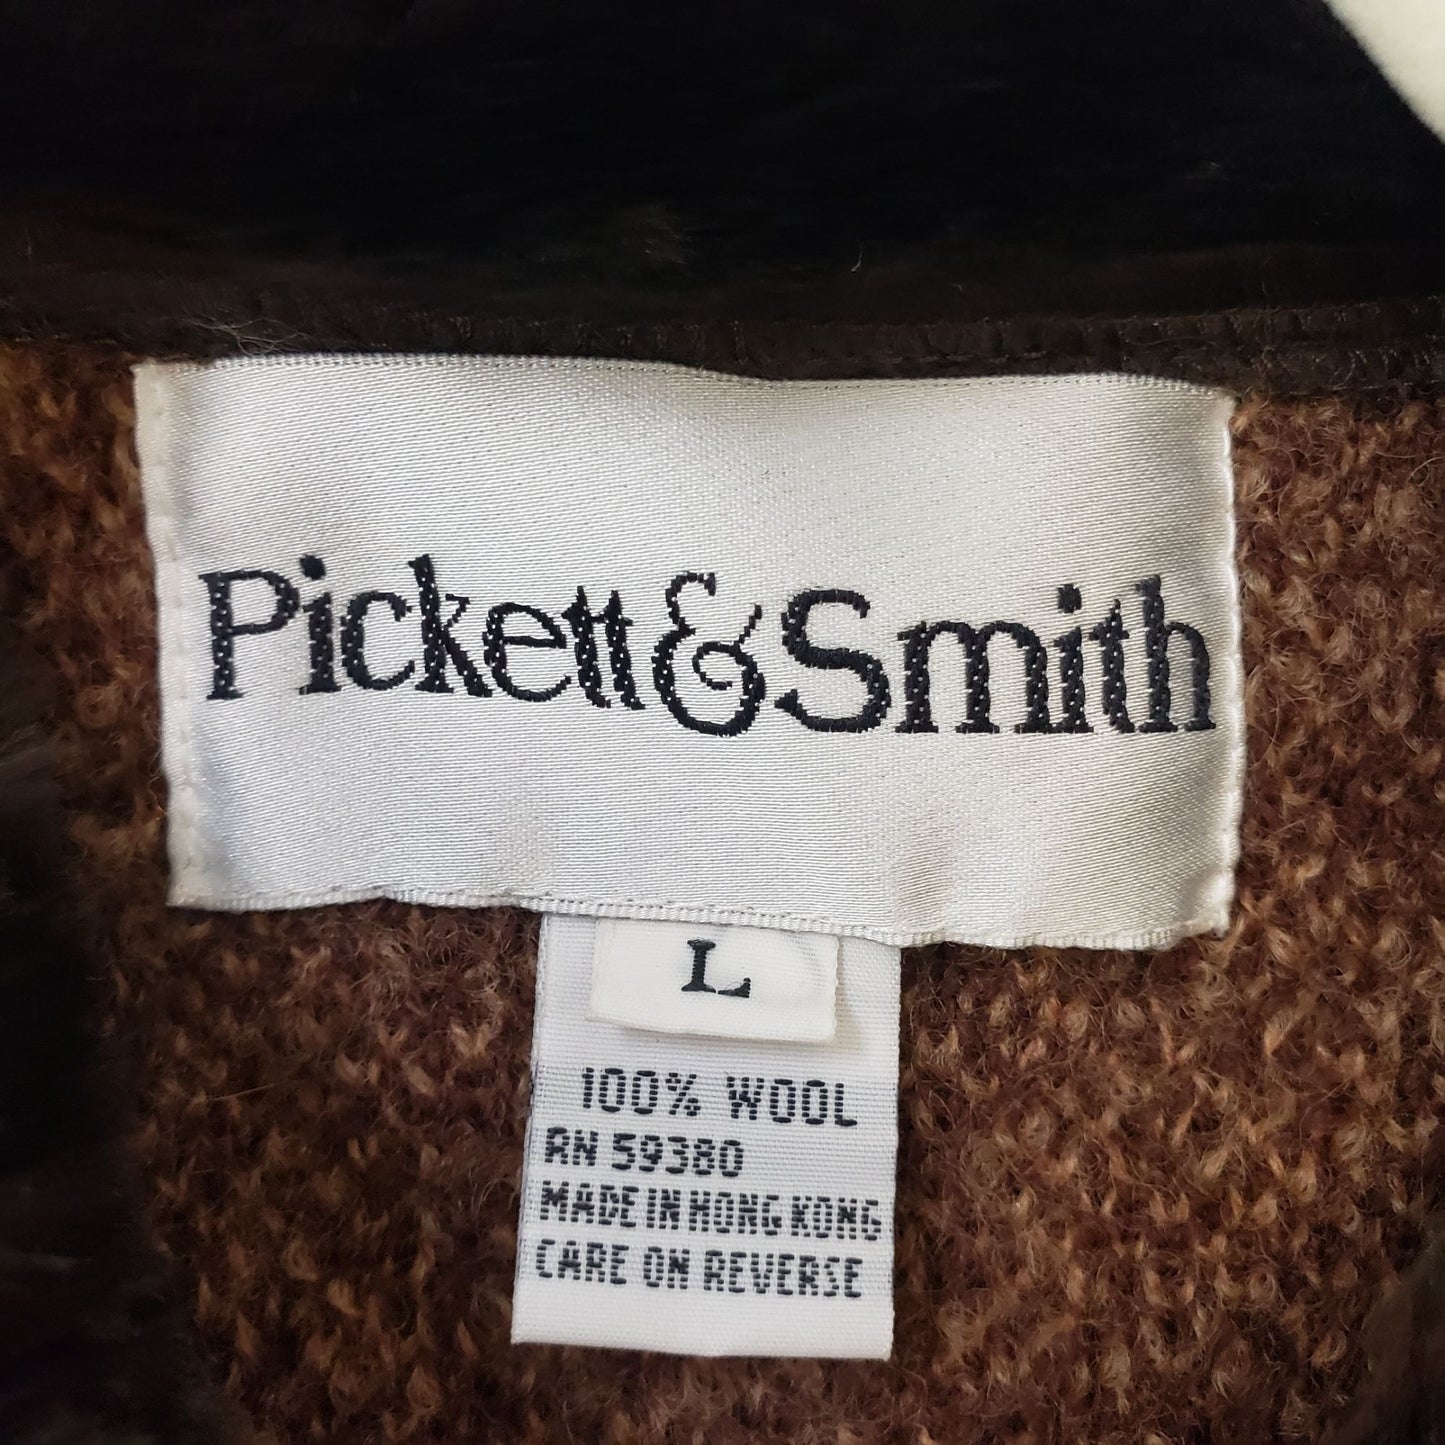 Pickett & Smith 100% Wool Cardigan Sweater with Faux Fur Trim Size Large